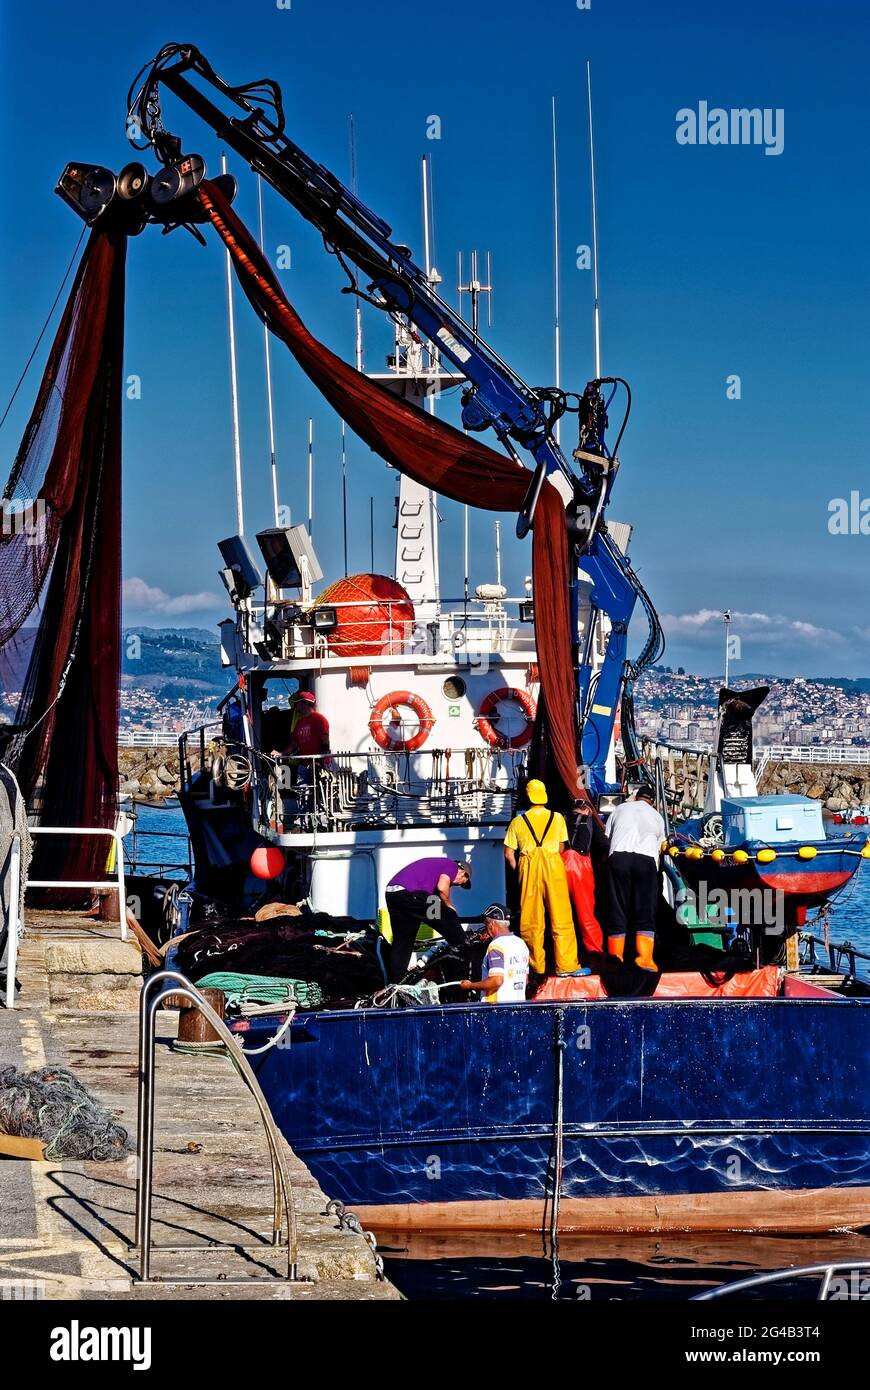 Cangas de Morrazo, Pontevedra, Spain. 12th Aug, 2013.  Fishing boat at work in the port Stock Photo